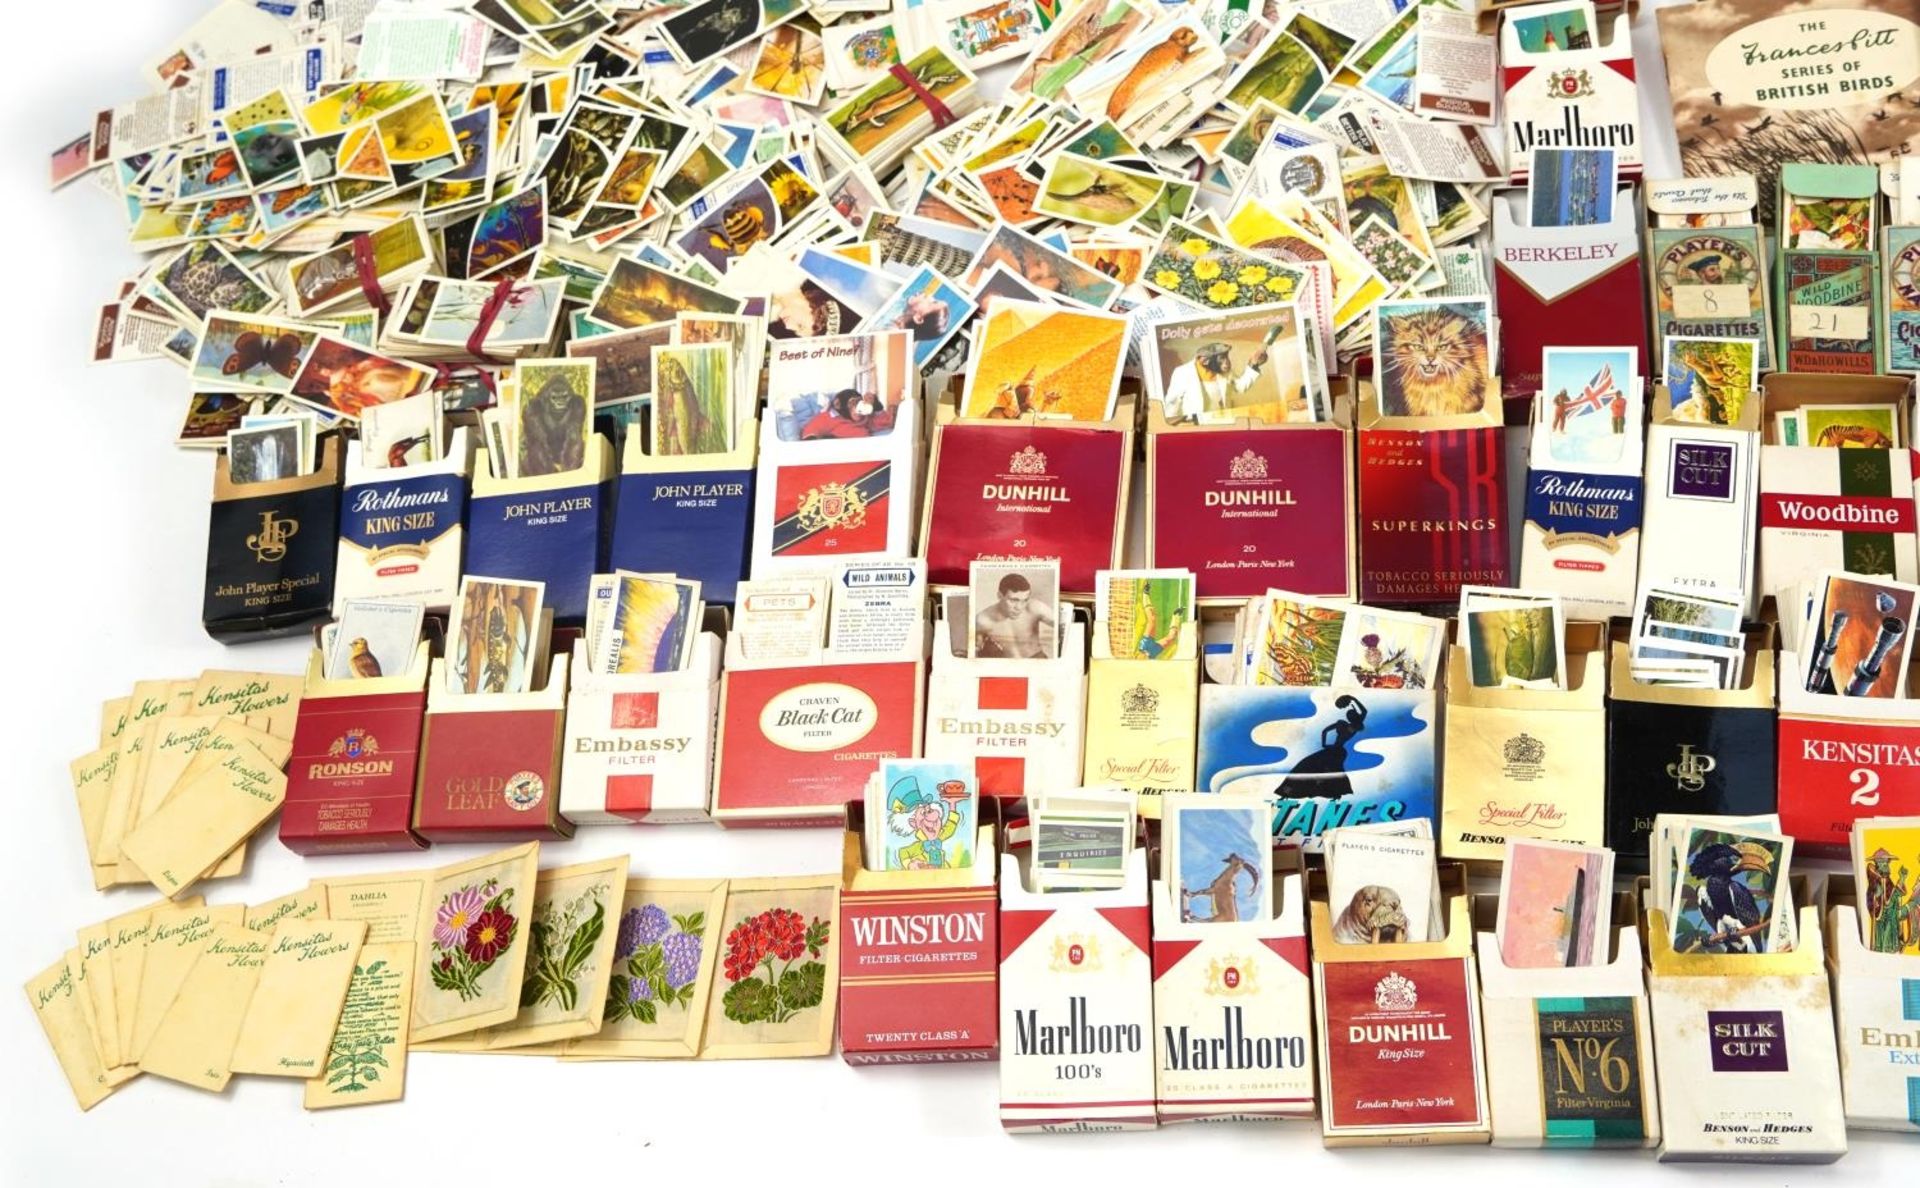 Extensive collection of cigarette and tea cards, some arranged in albums including Brooke Bond - Image 5 of 11